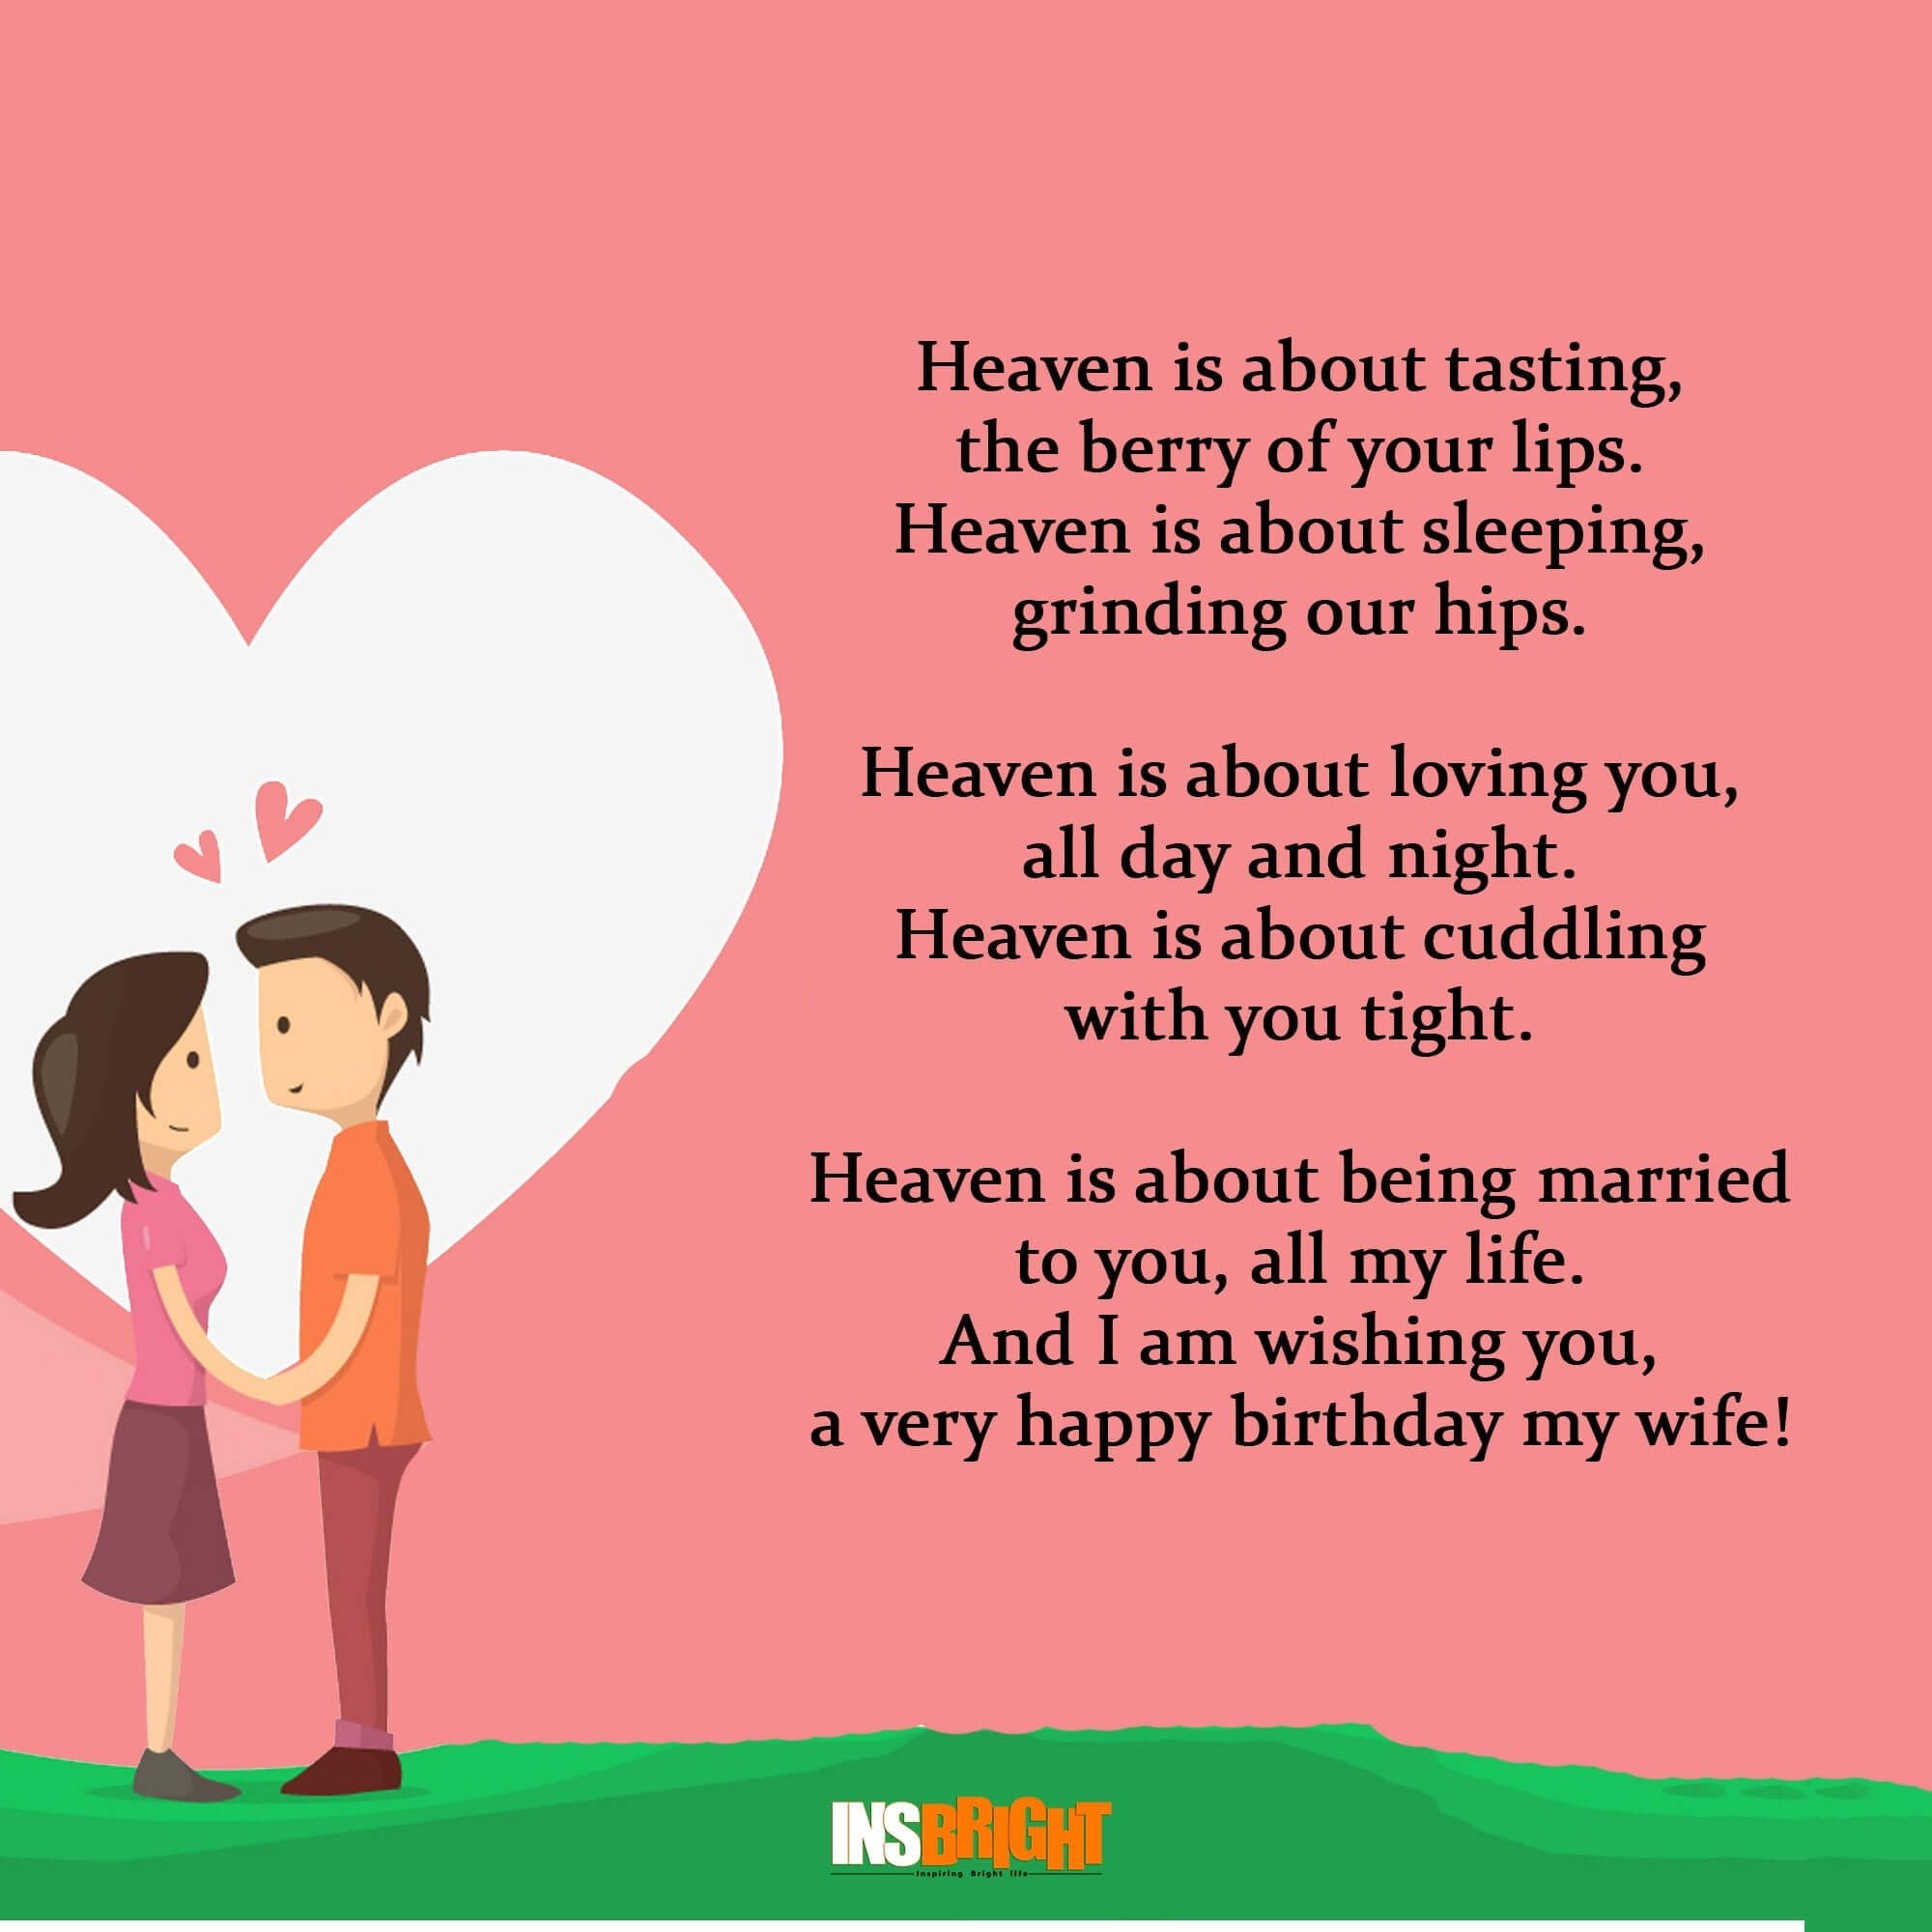 Happy Birthday Wishes For Wife in 2020: Happy Birthday SMS For Wife